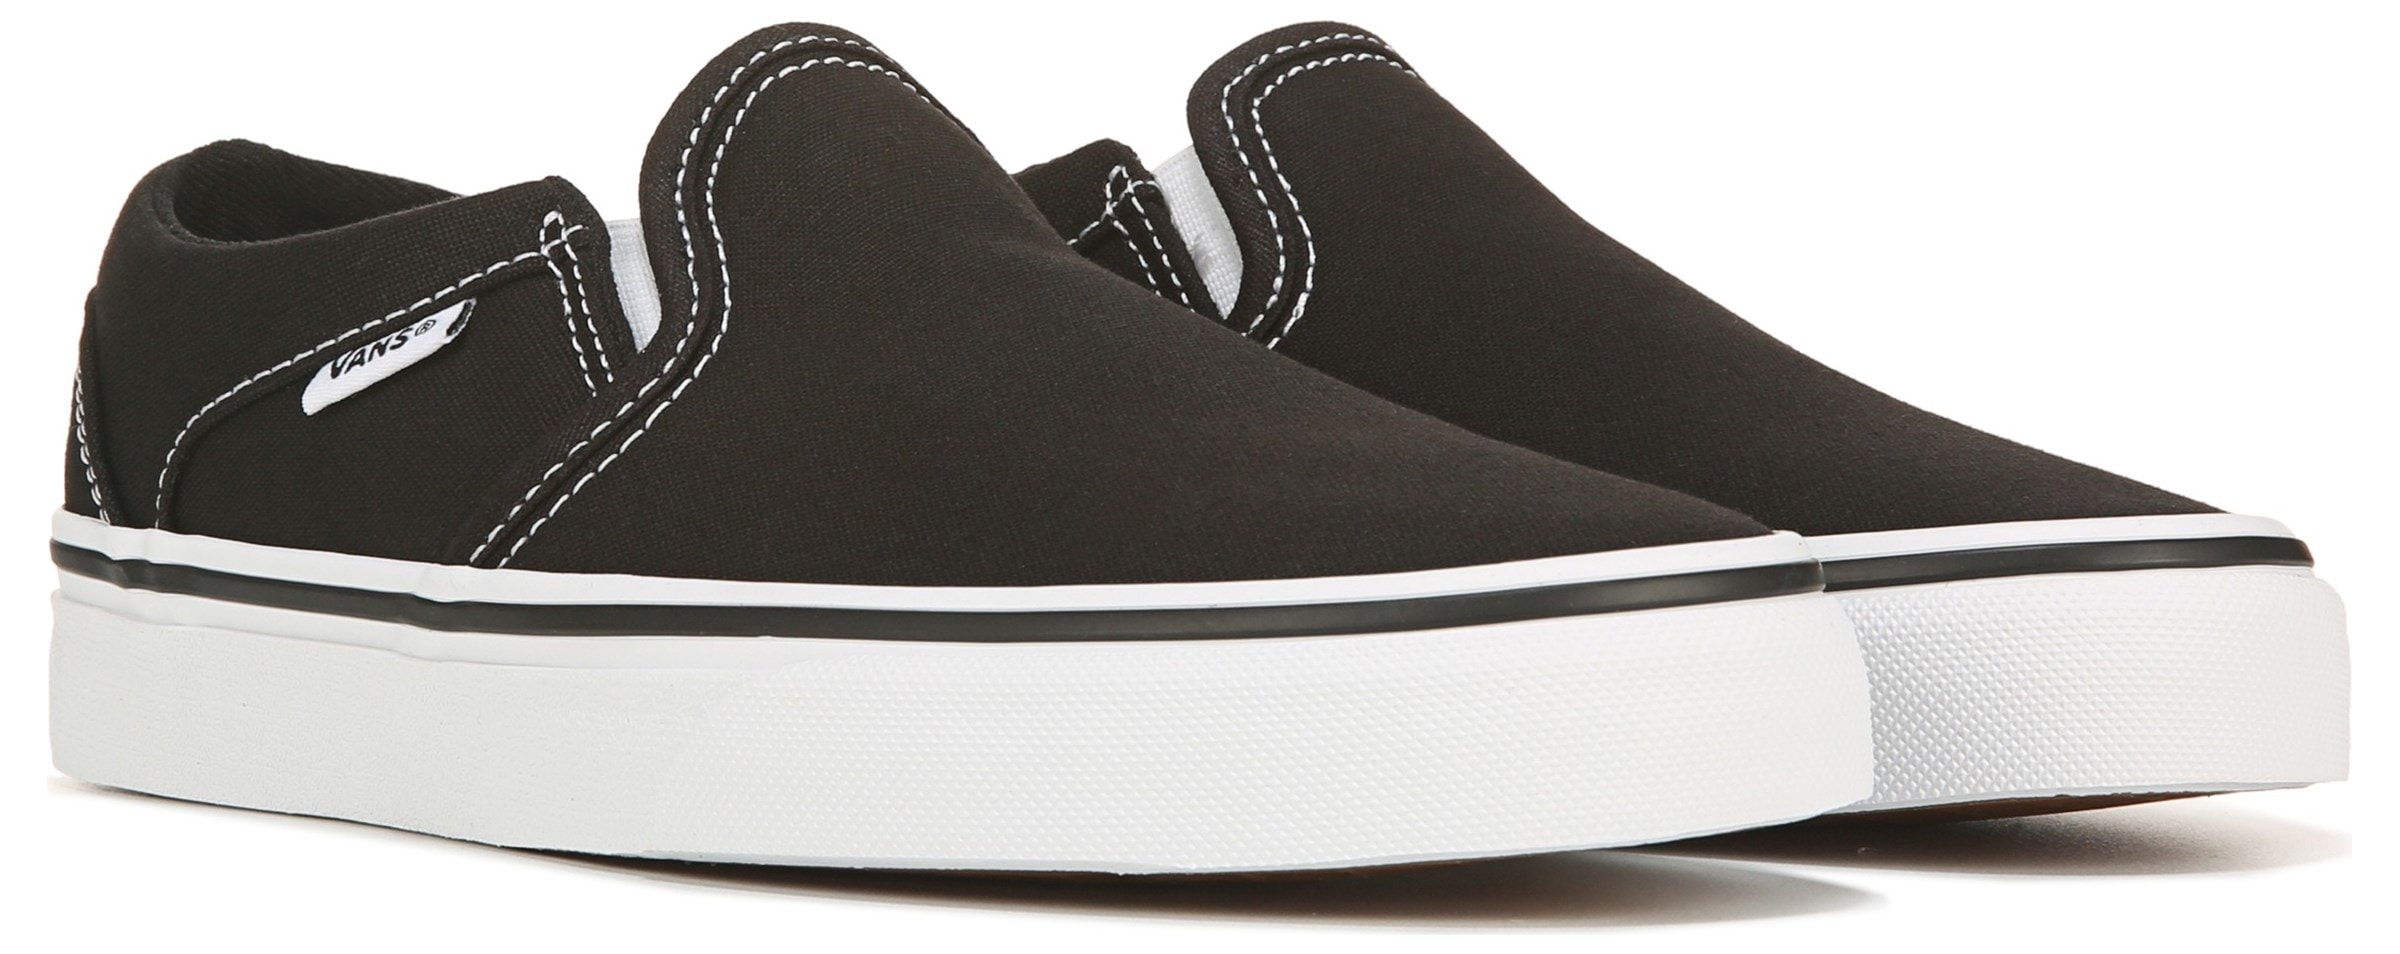 Vans Women Black Perforated Leather Asher Slip On Sneakers US 6.5